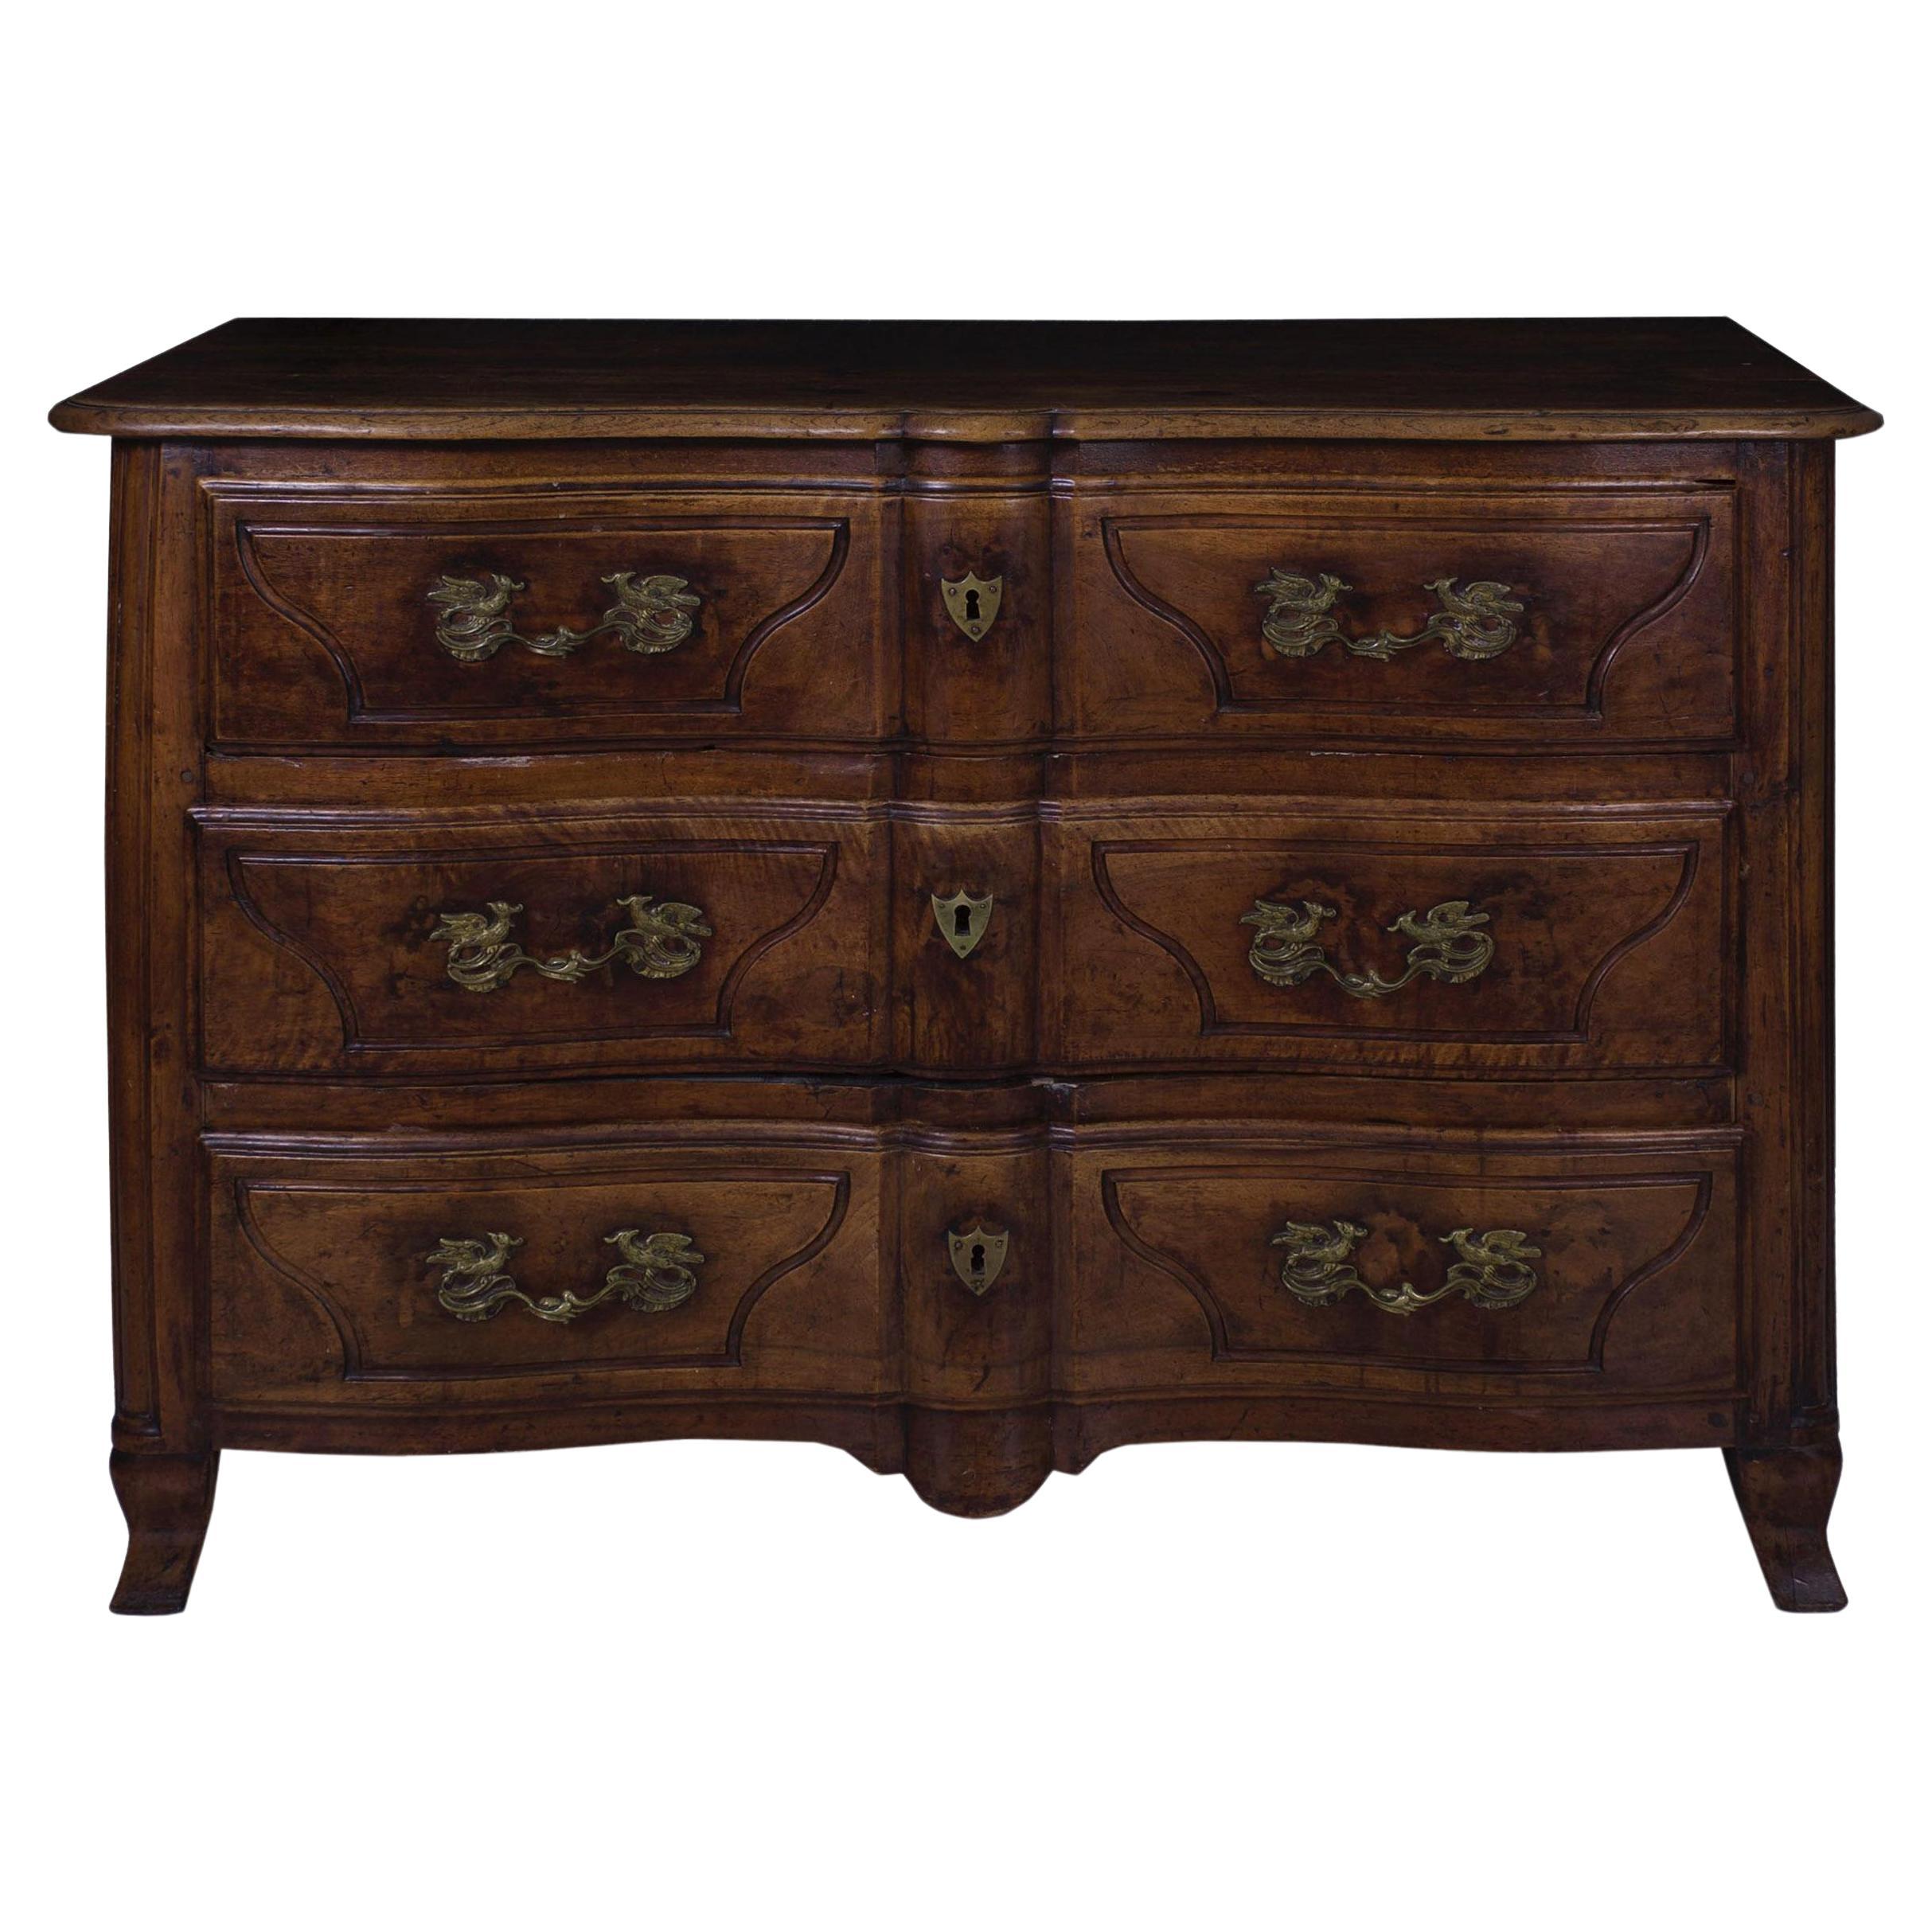 18th Century Regencé Period Walnut Commode Chest of Drawers, circa 1730-1750 For Sale